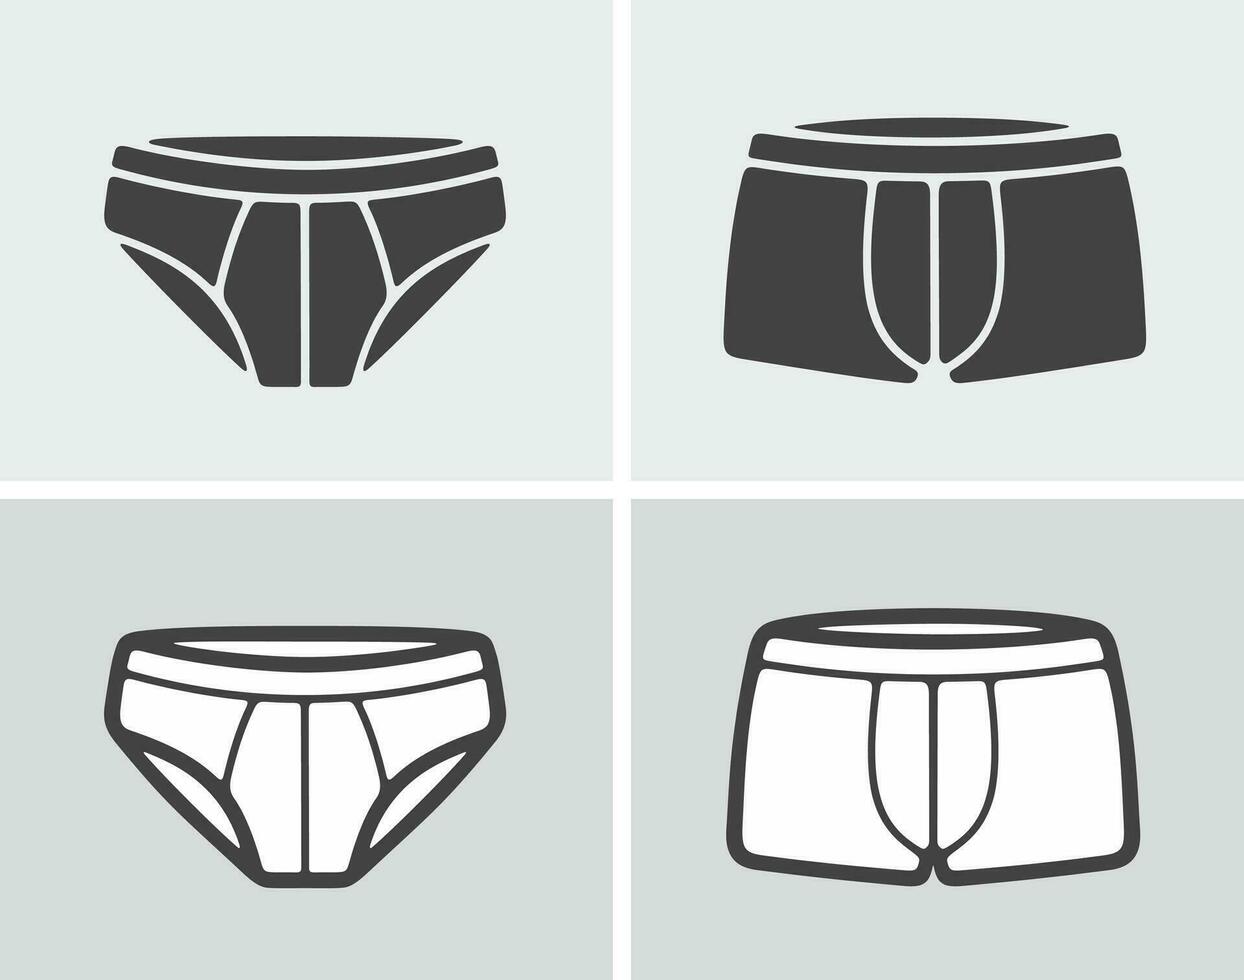 Men's underwear icon on a background. Pants and boxer briefs. Vector illustration.